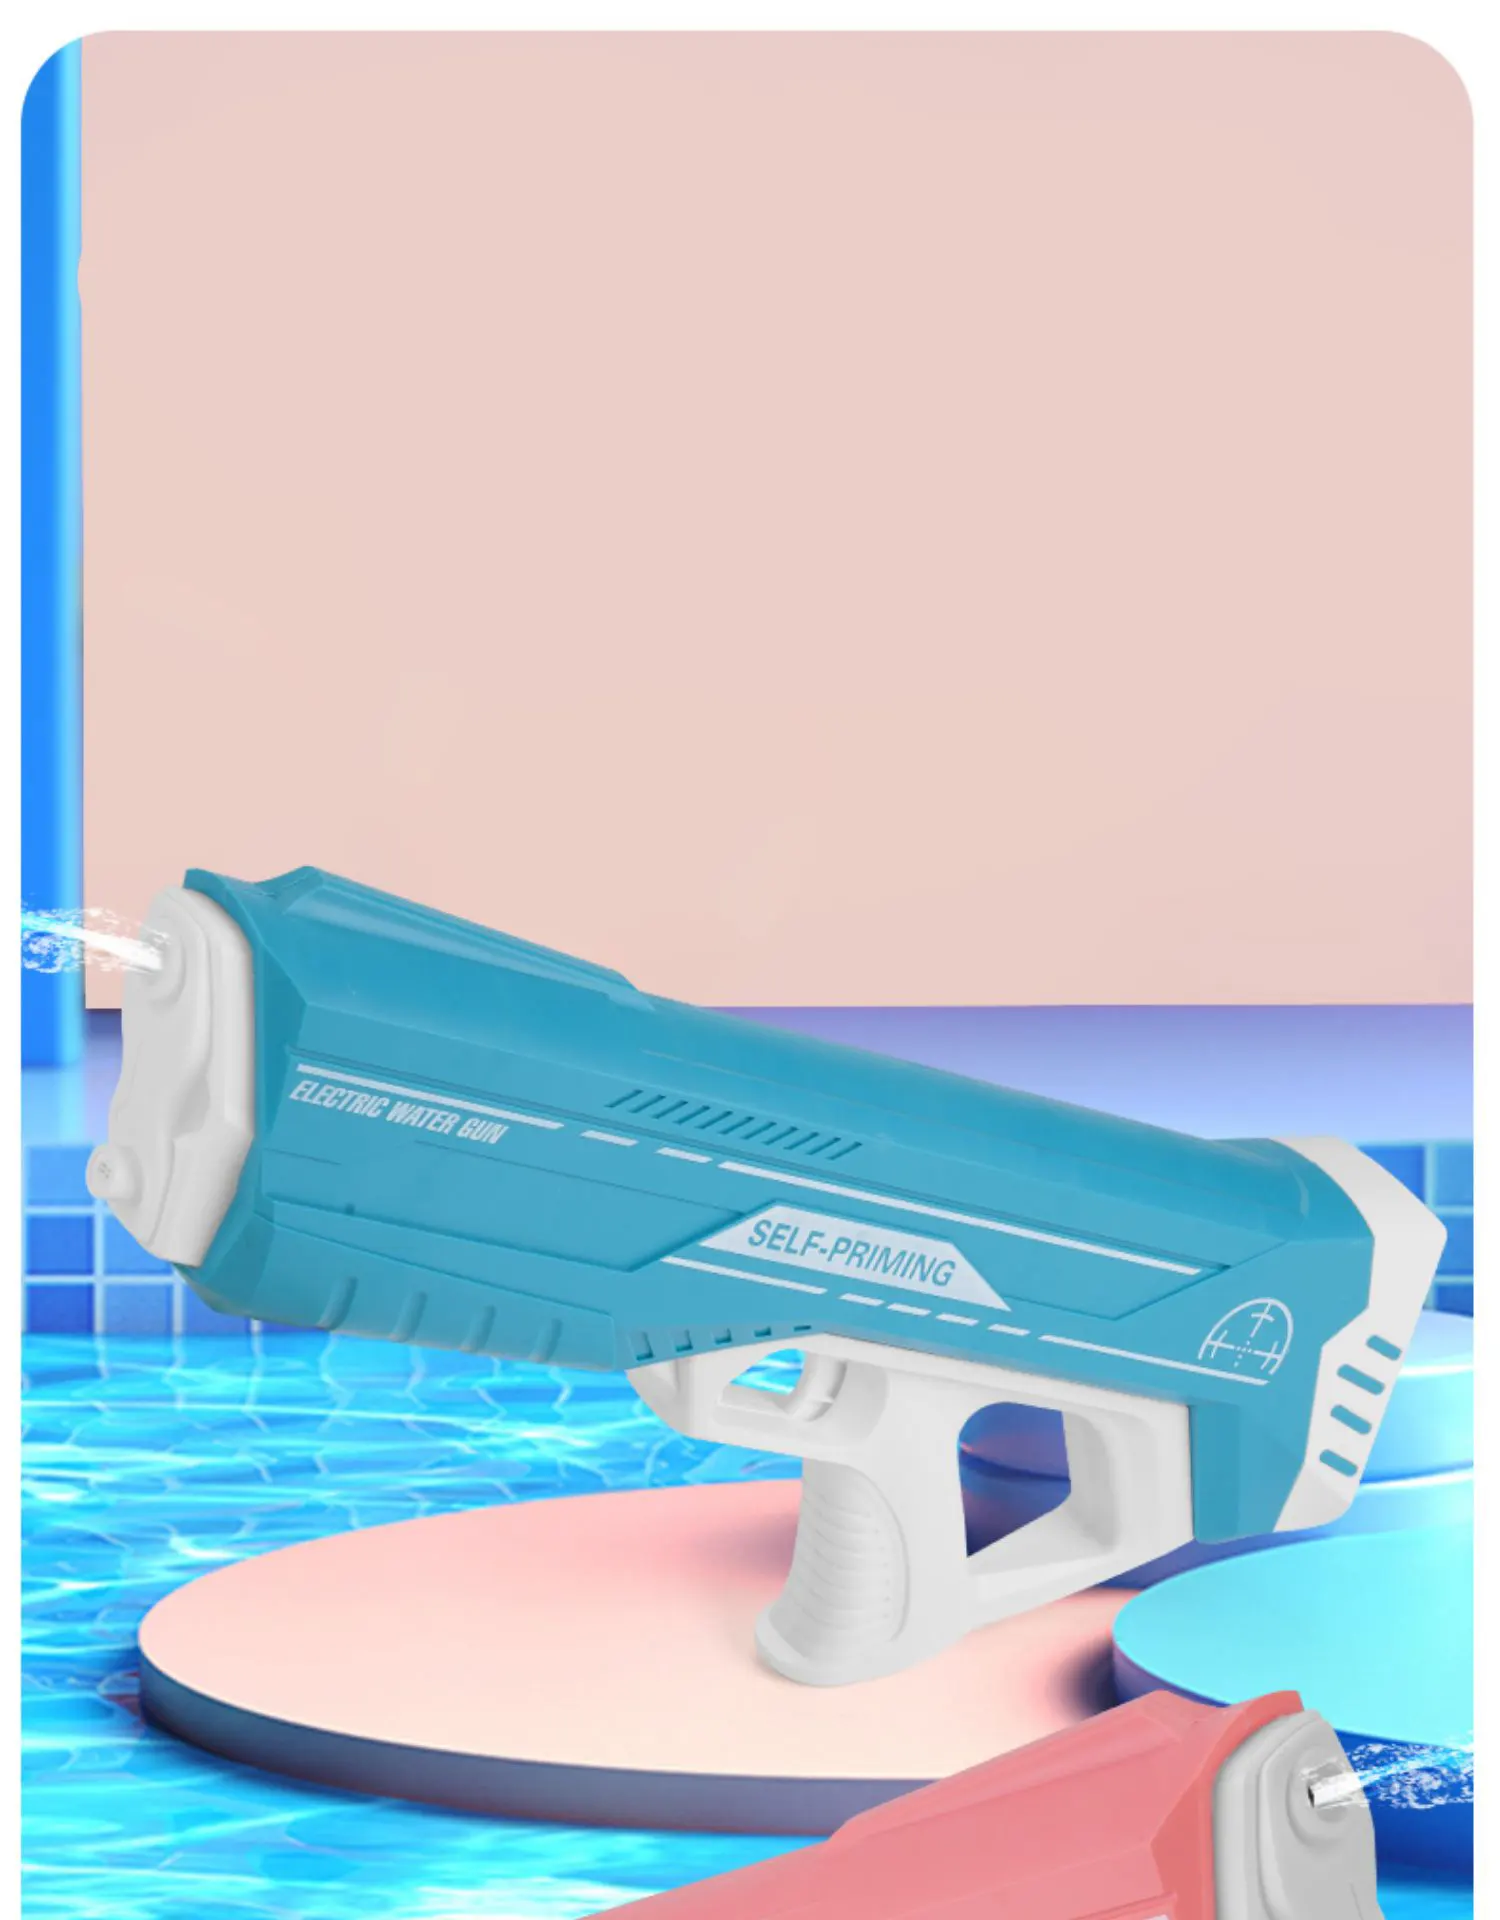 Hot Selling Songkran Fast Delivery Electric Water Gun Automatic & Precise High End Premium Water Gun Electric